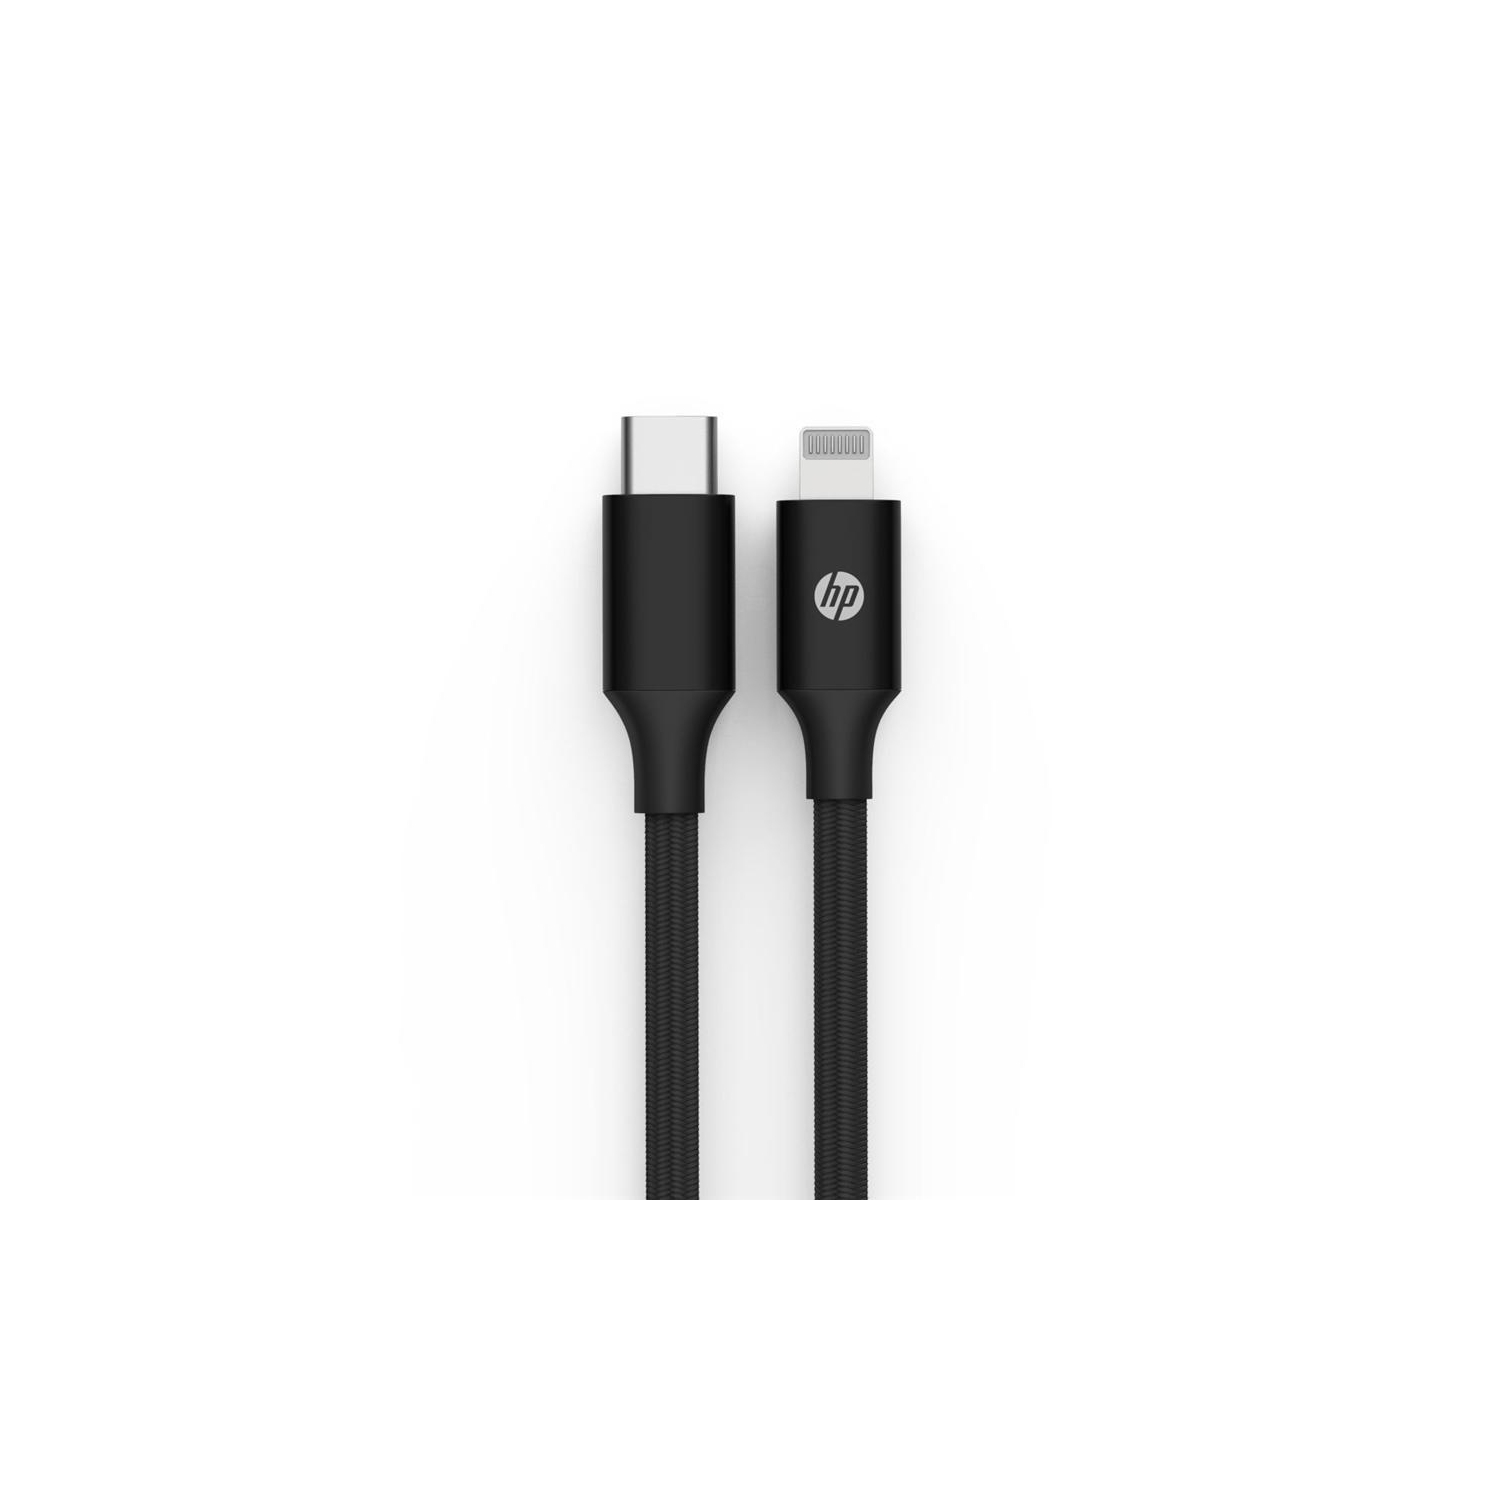 HP - USB C to Lightning Cable, Charge and Sync, Aluminum Alloy, 1 Meter Length, Black